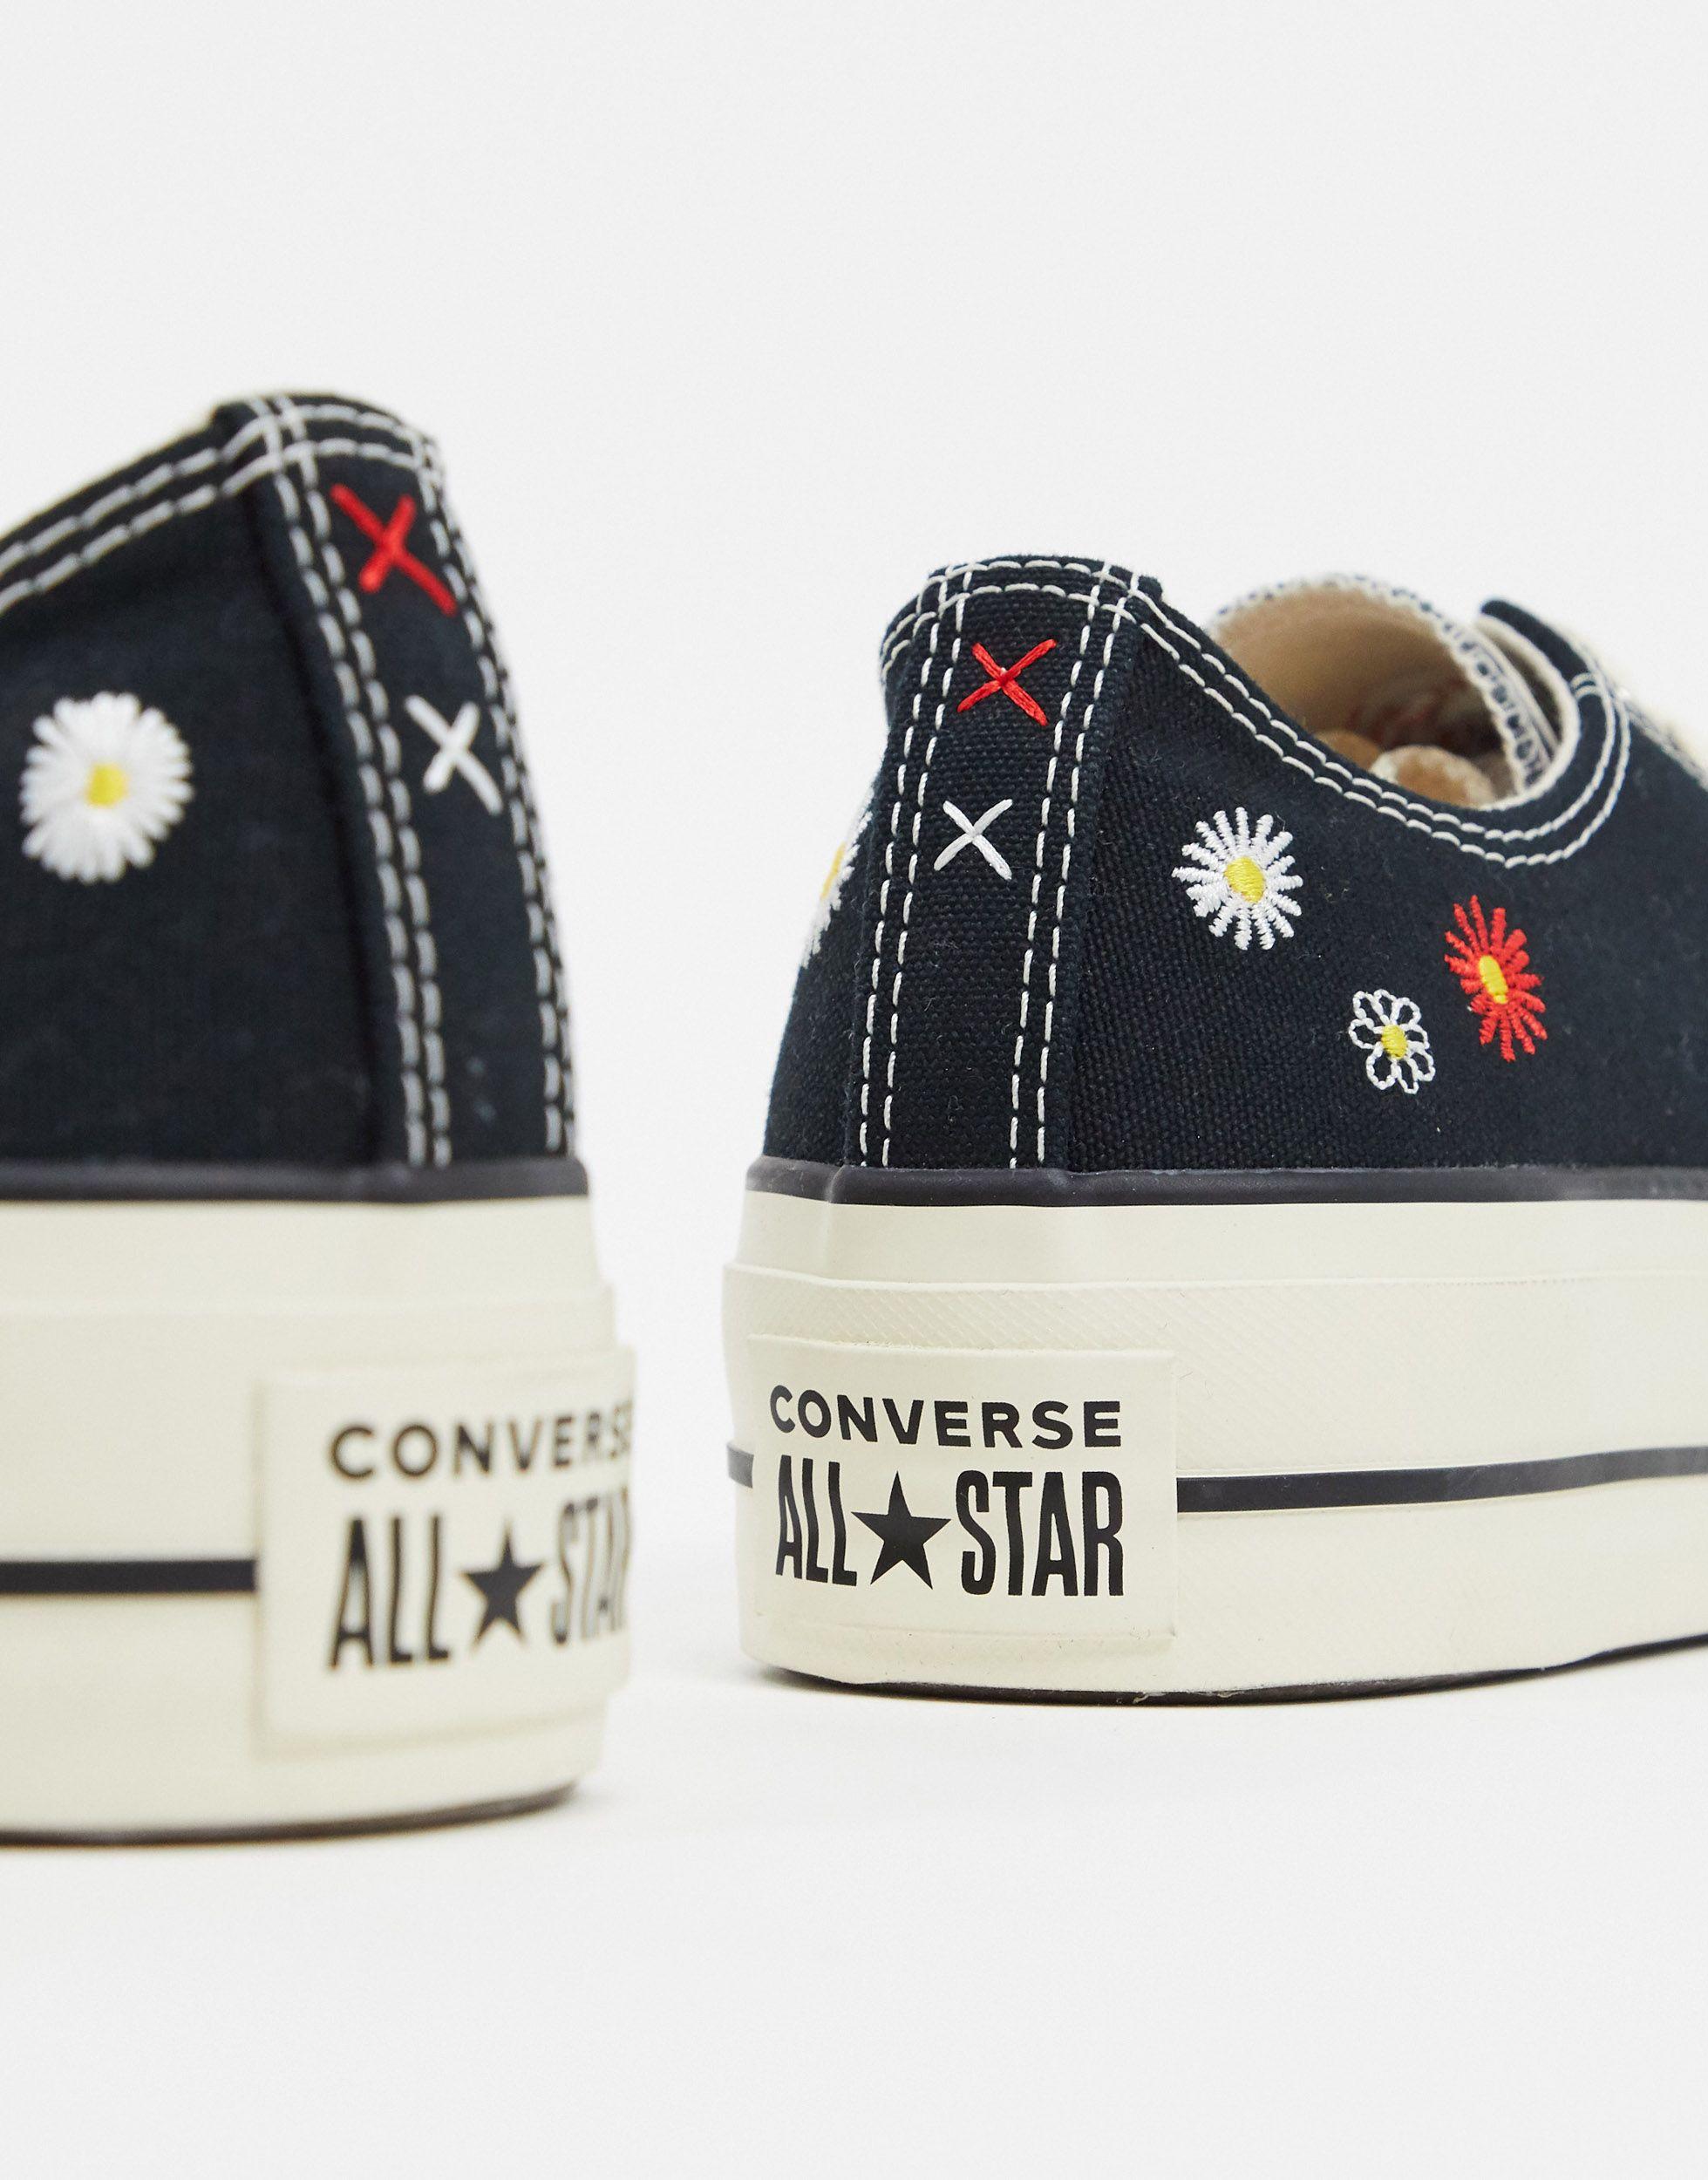 Converse Chuck Taylor Lift Platform Black Embroidered Floral Sneakers | Lyst